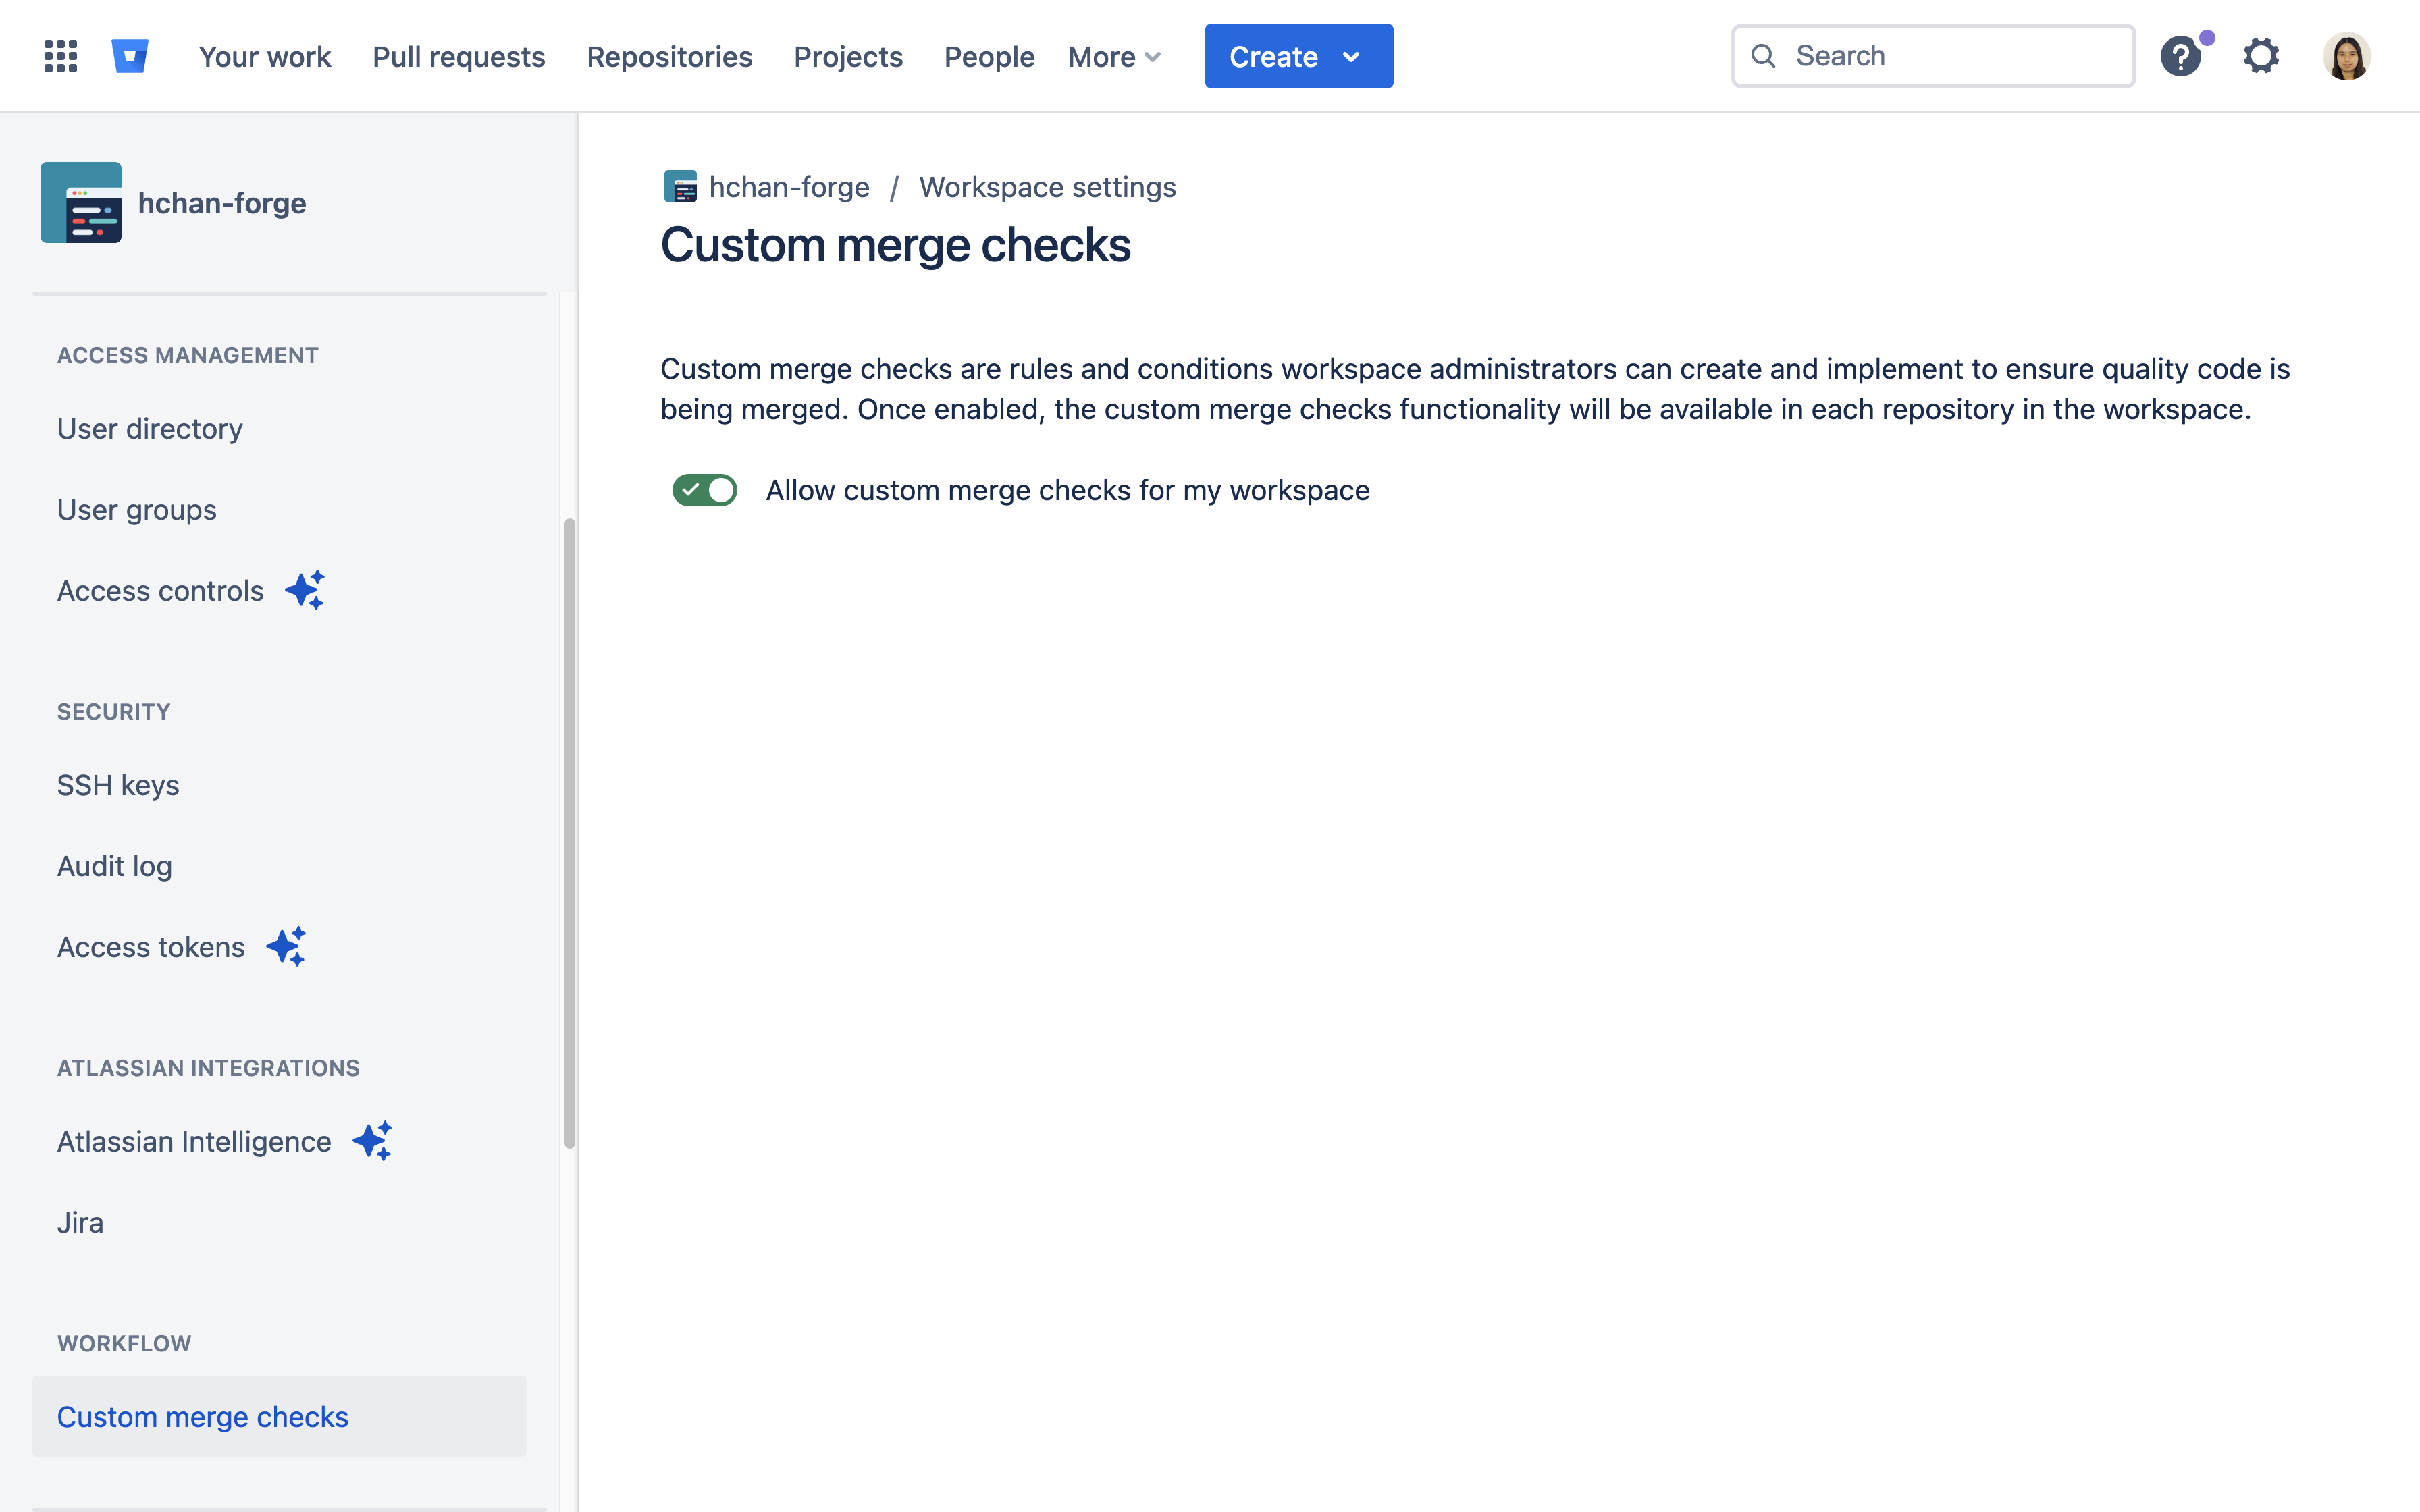 Enable the custom merge check feature in your workspace settings